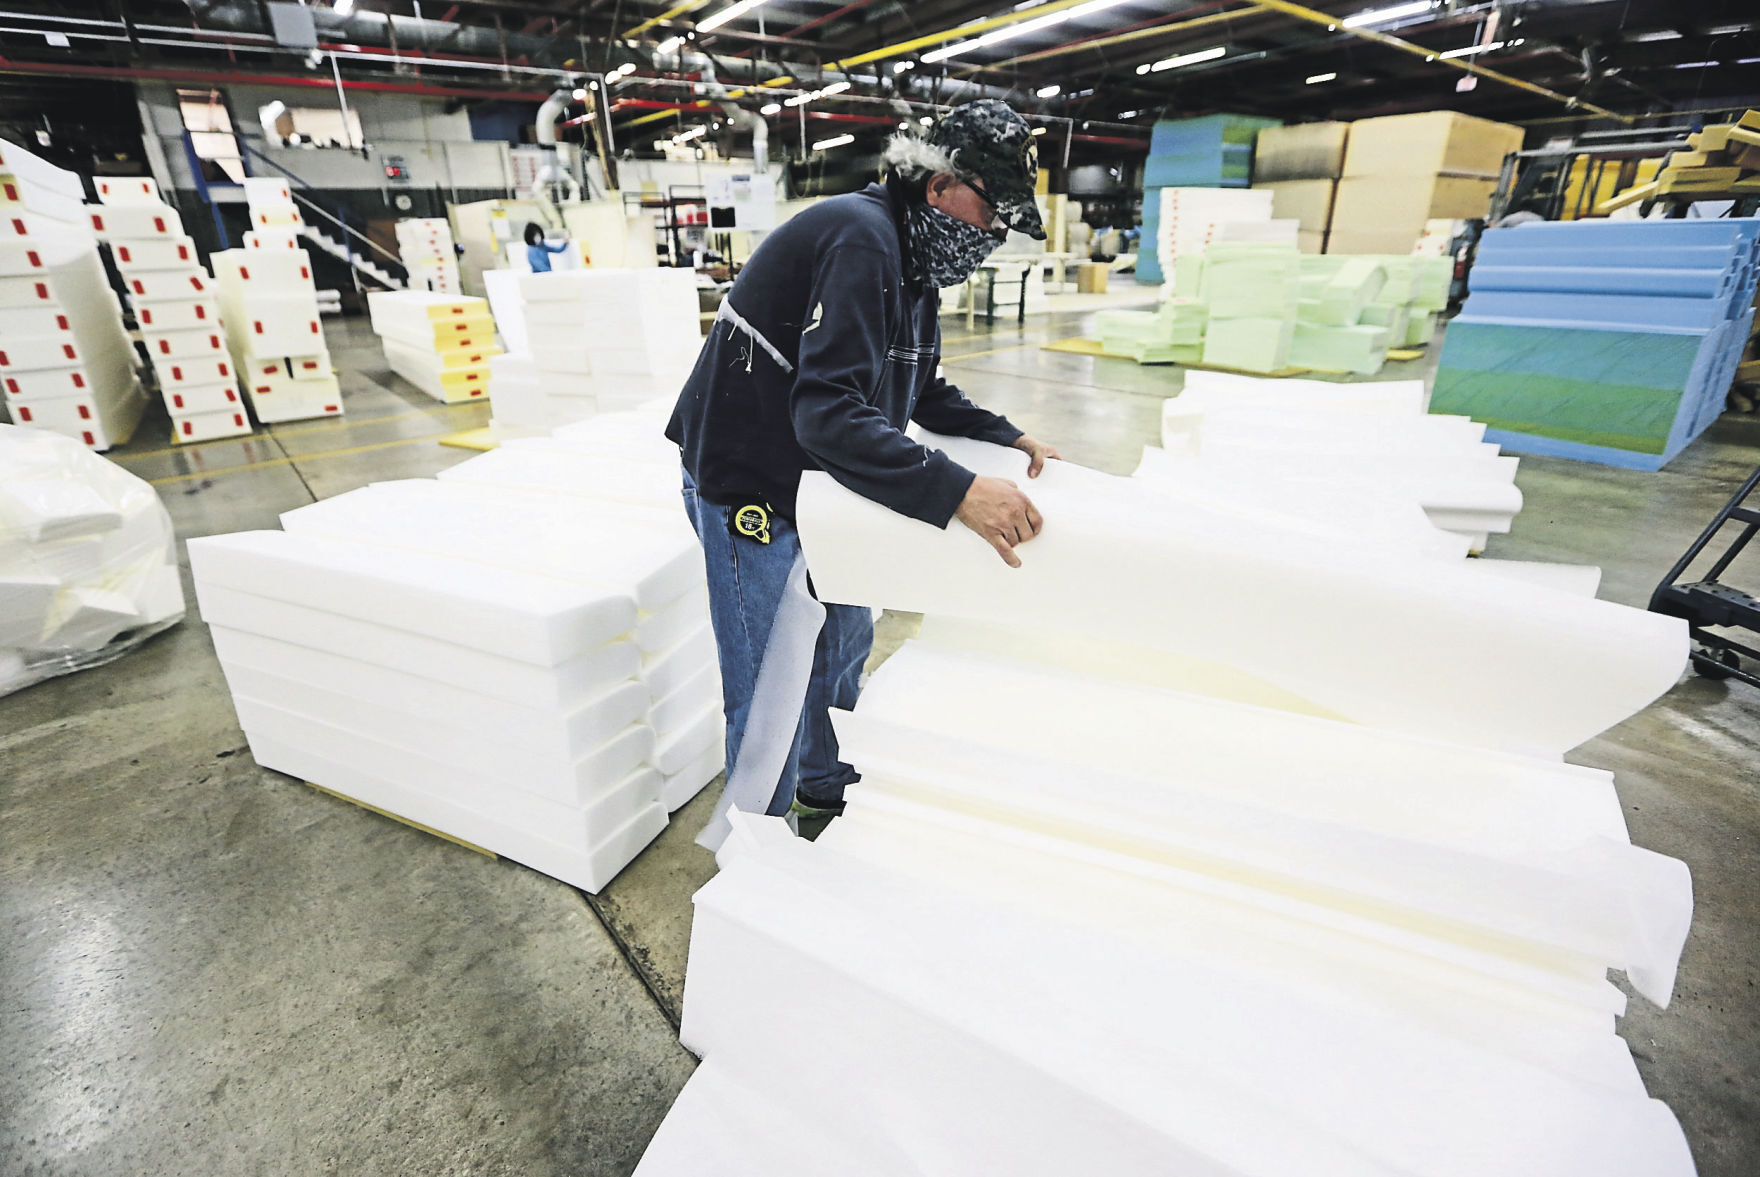 James Boal prepares material for assembly at the company’s plant on Kerper Boulevard. It supplies material to customers in Dubuque and nationally. PHOTO CREDIT: NICKI KOHL